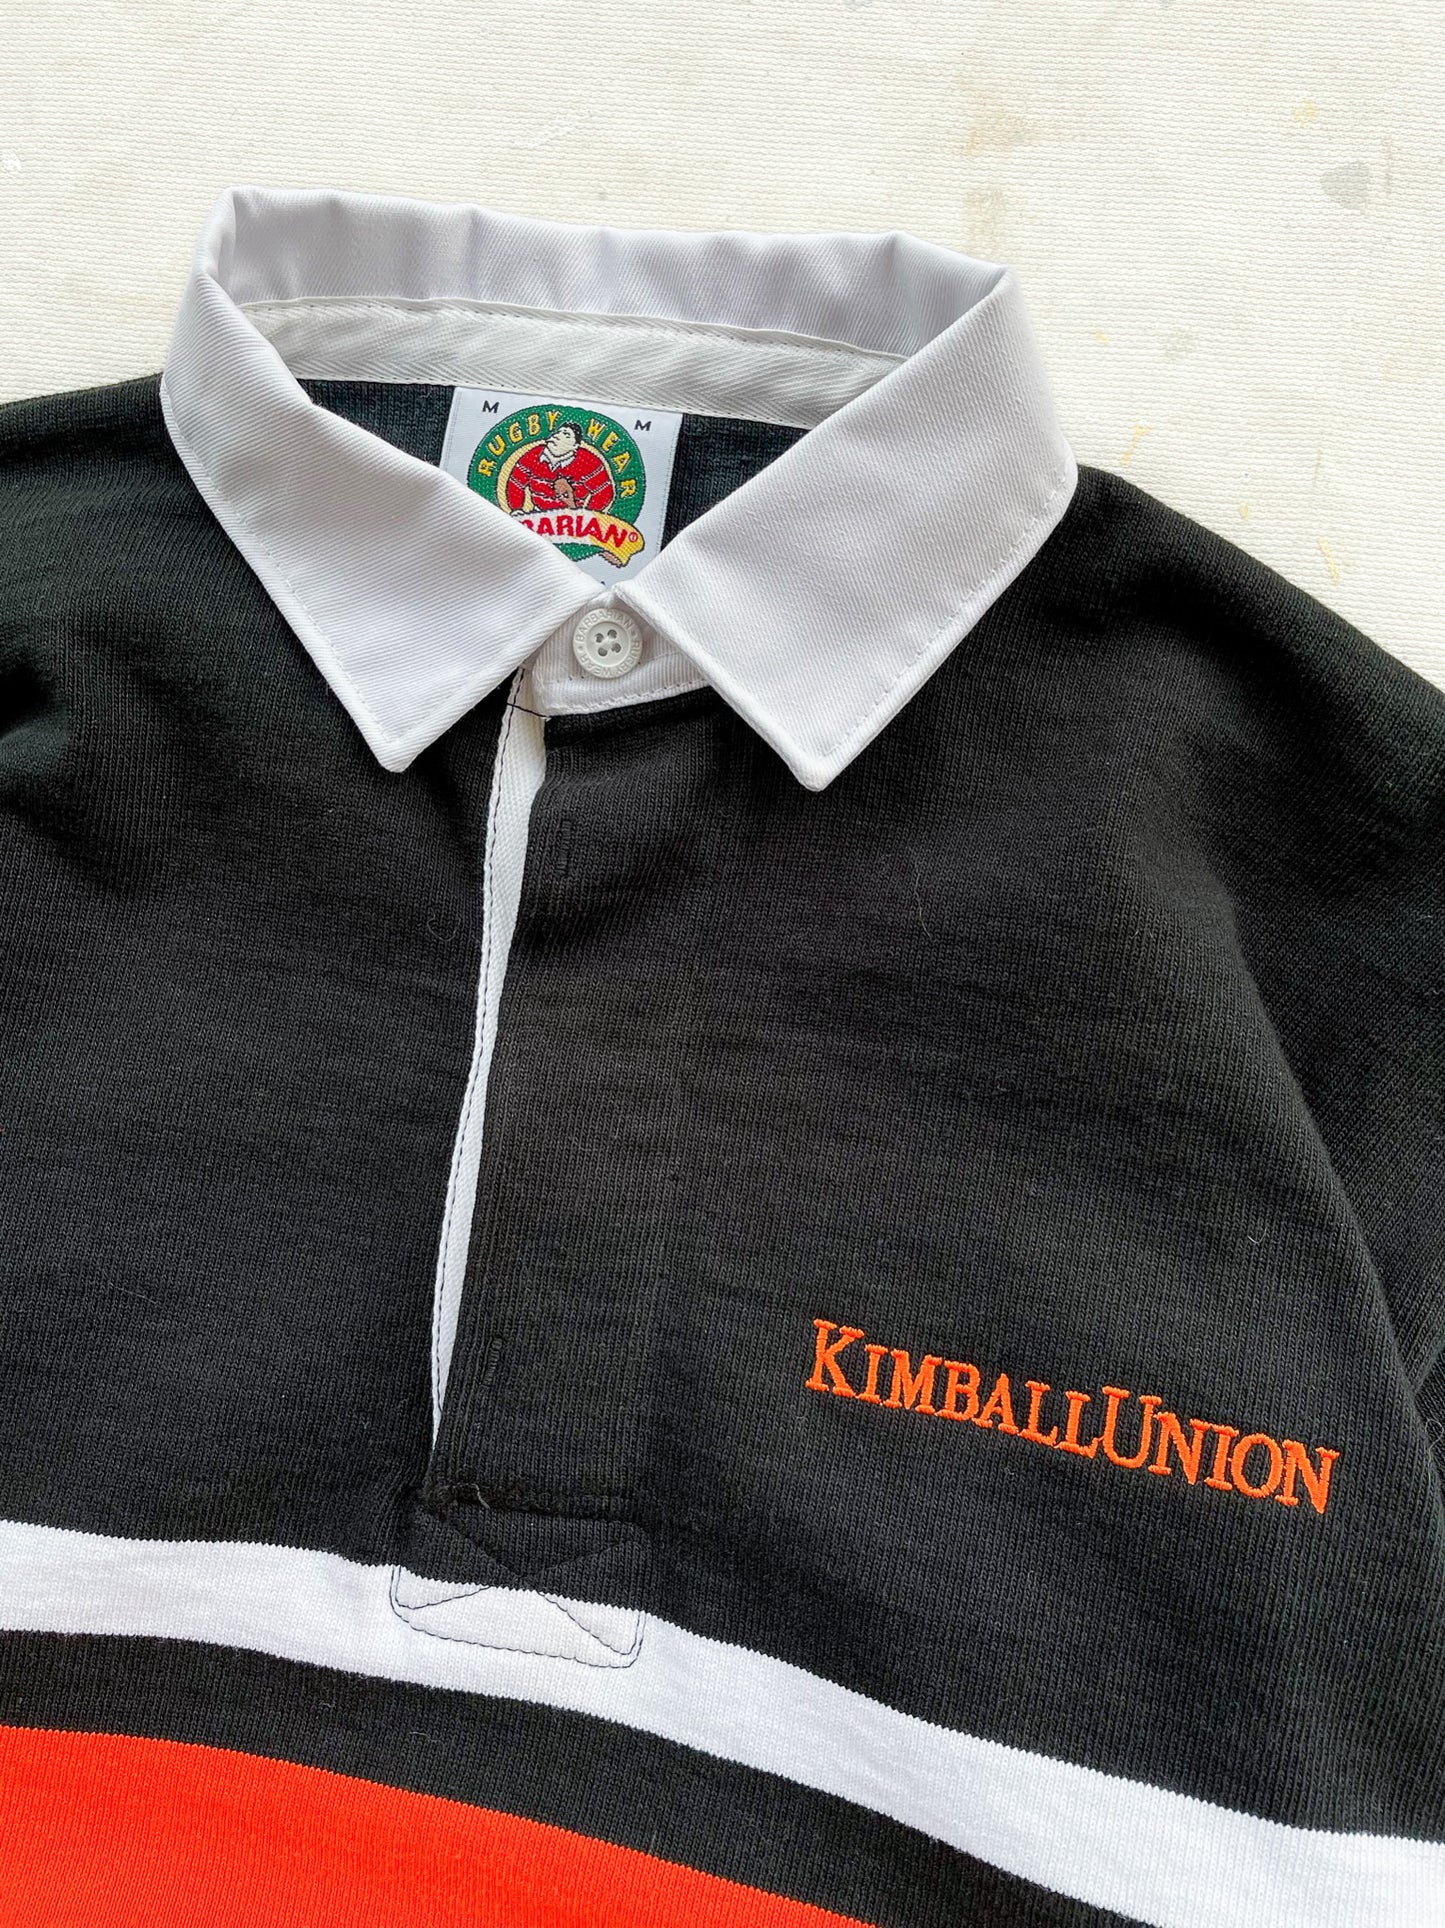 Kimball Union Academy Barbarian Rugby Wear Shirt—[M]